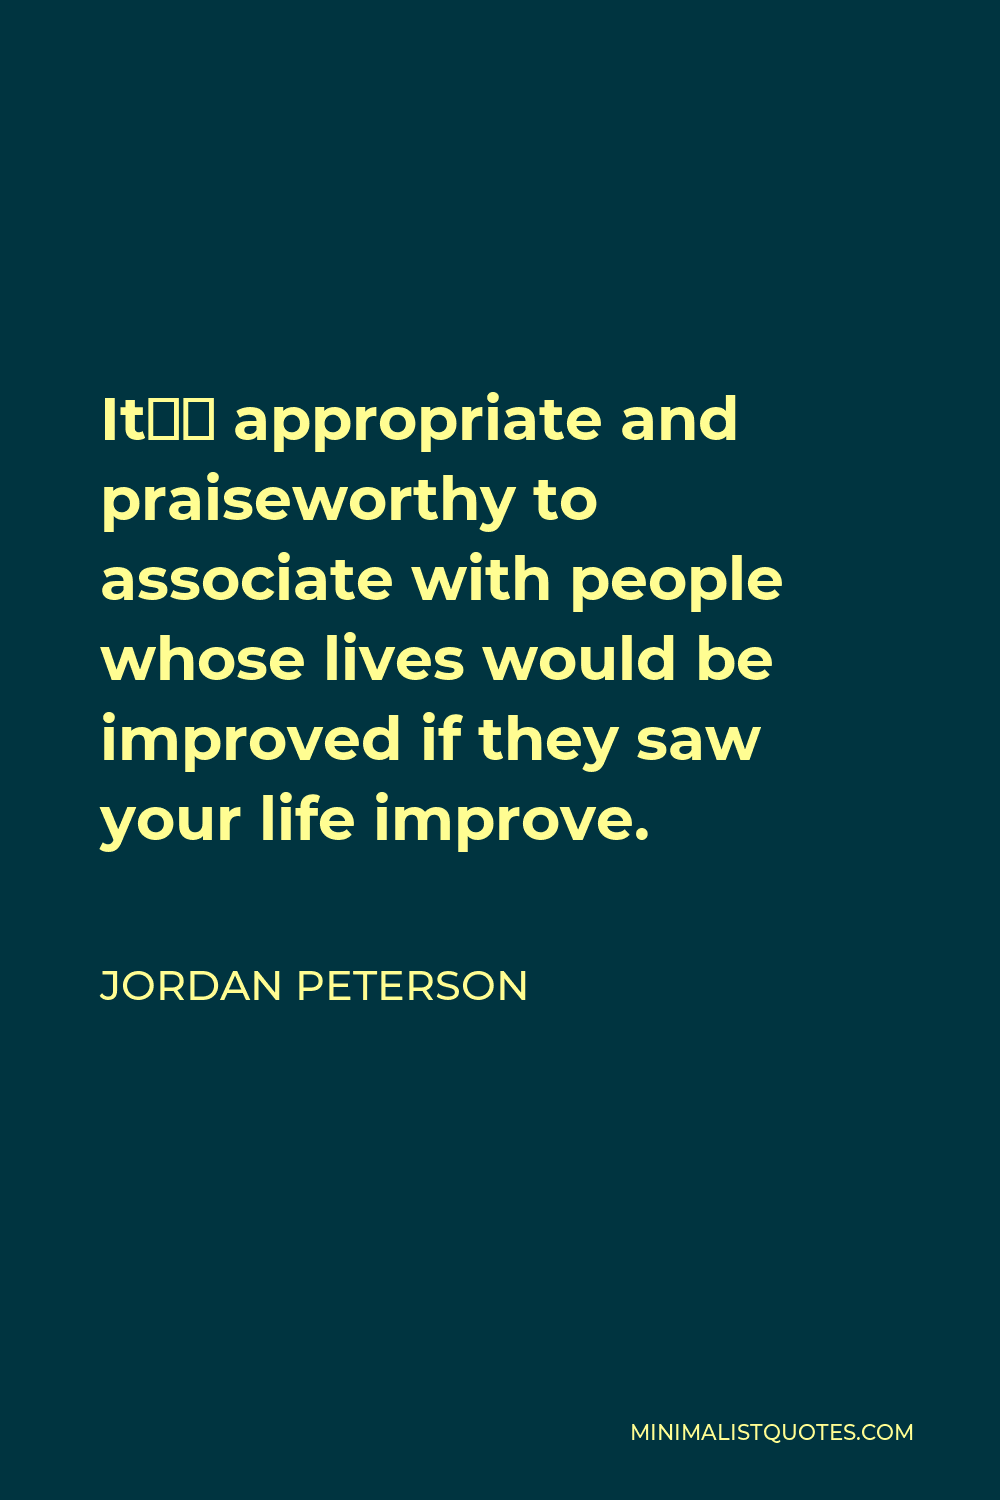 Jordan Peterson Quote - It’s appropriate and praiseworthy to associate with people whose lives would be improved if they saw your life improve.